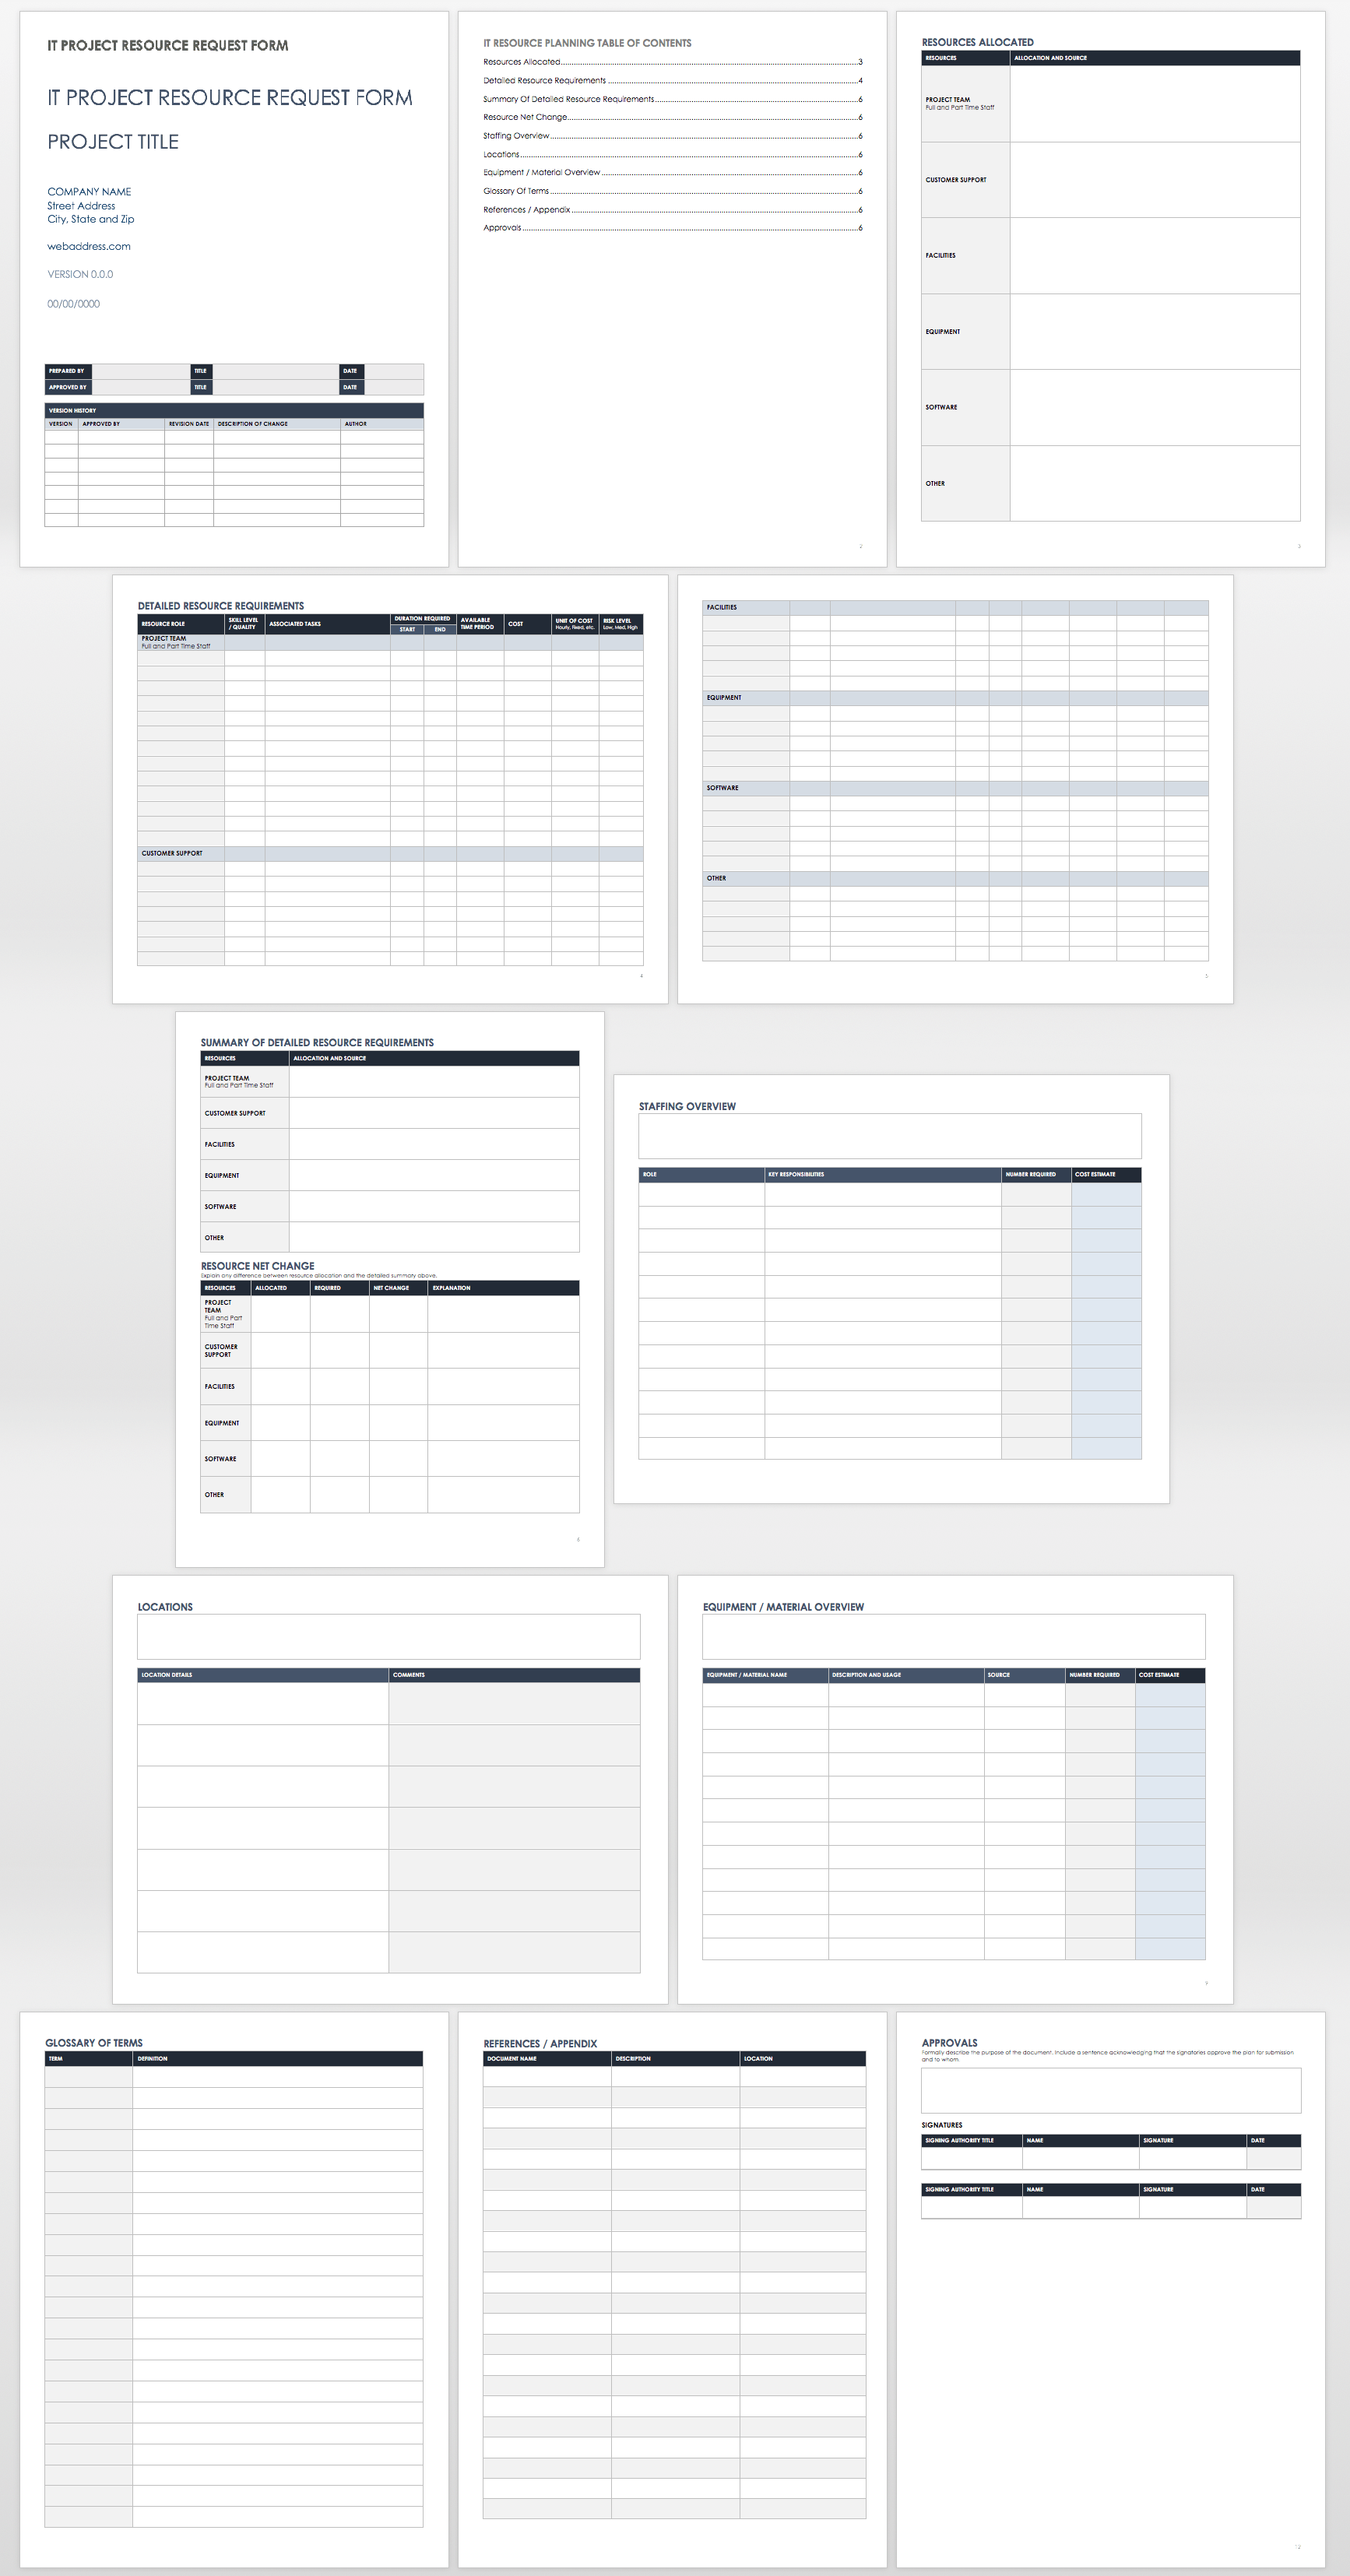 IT Project Resource Request Form Template